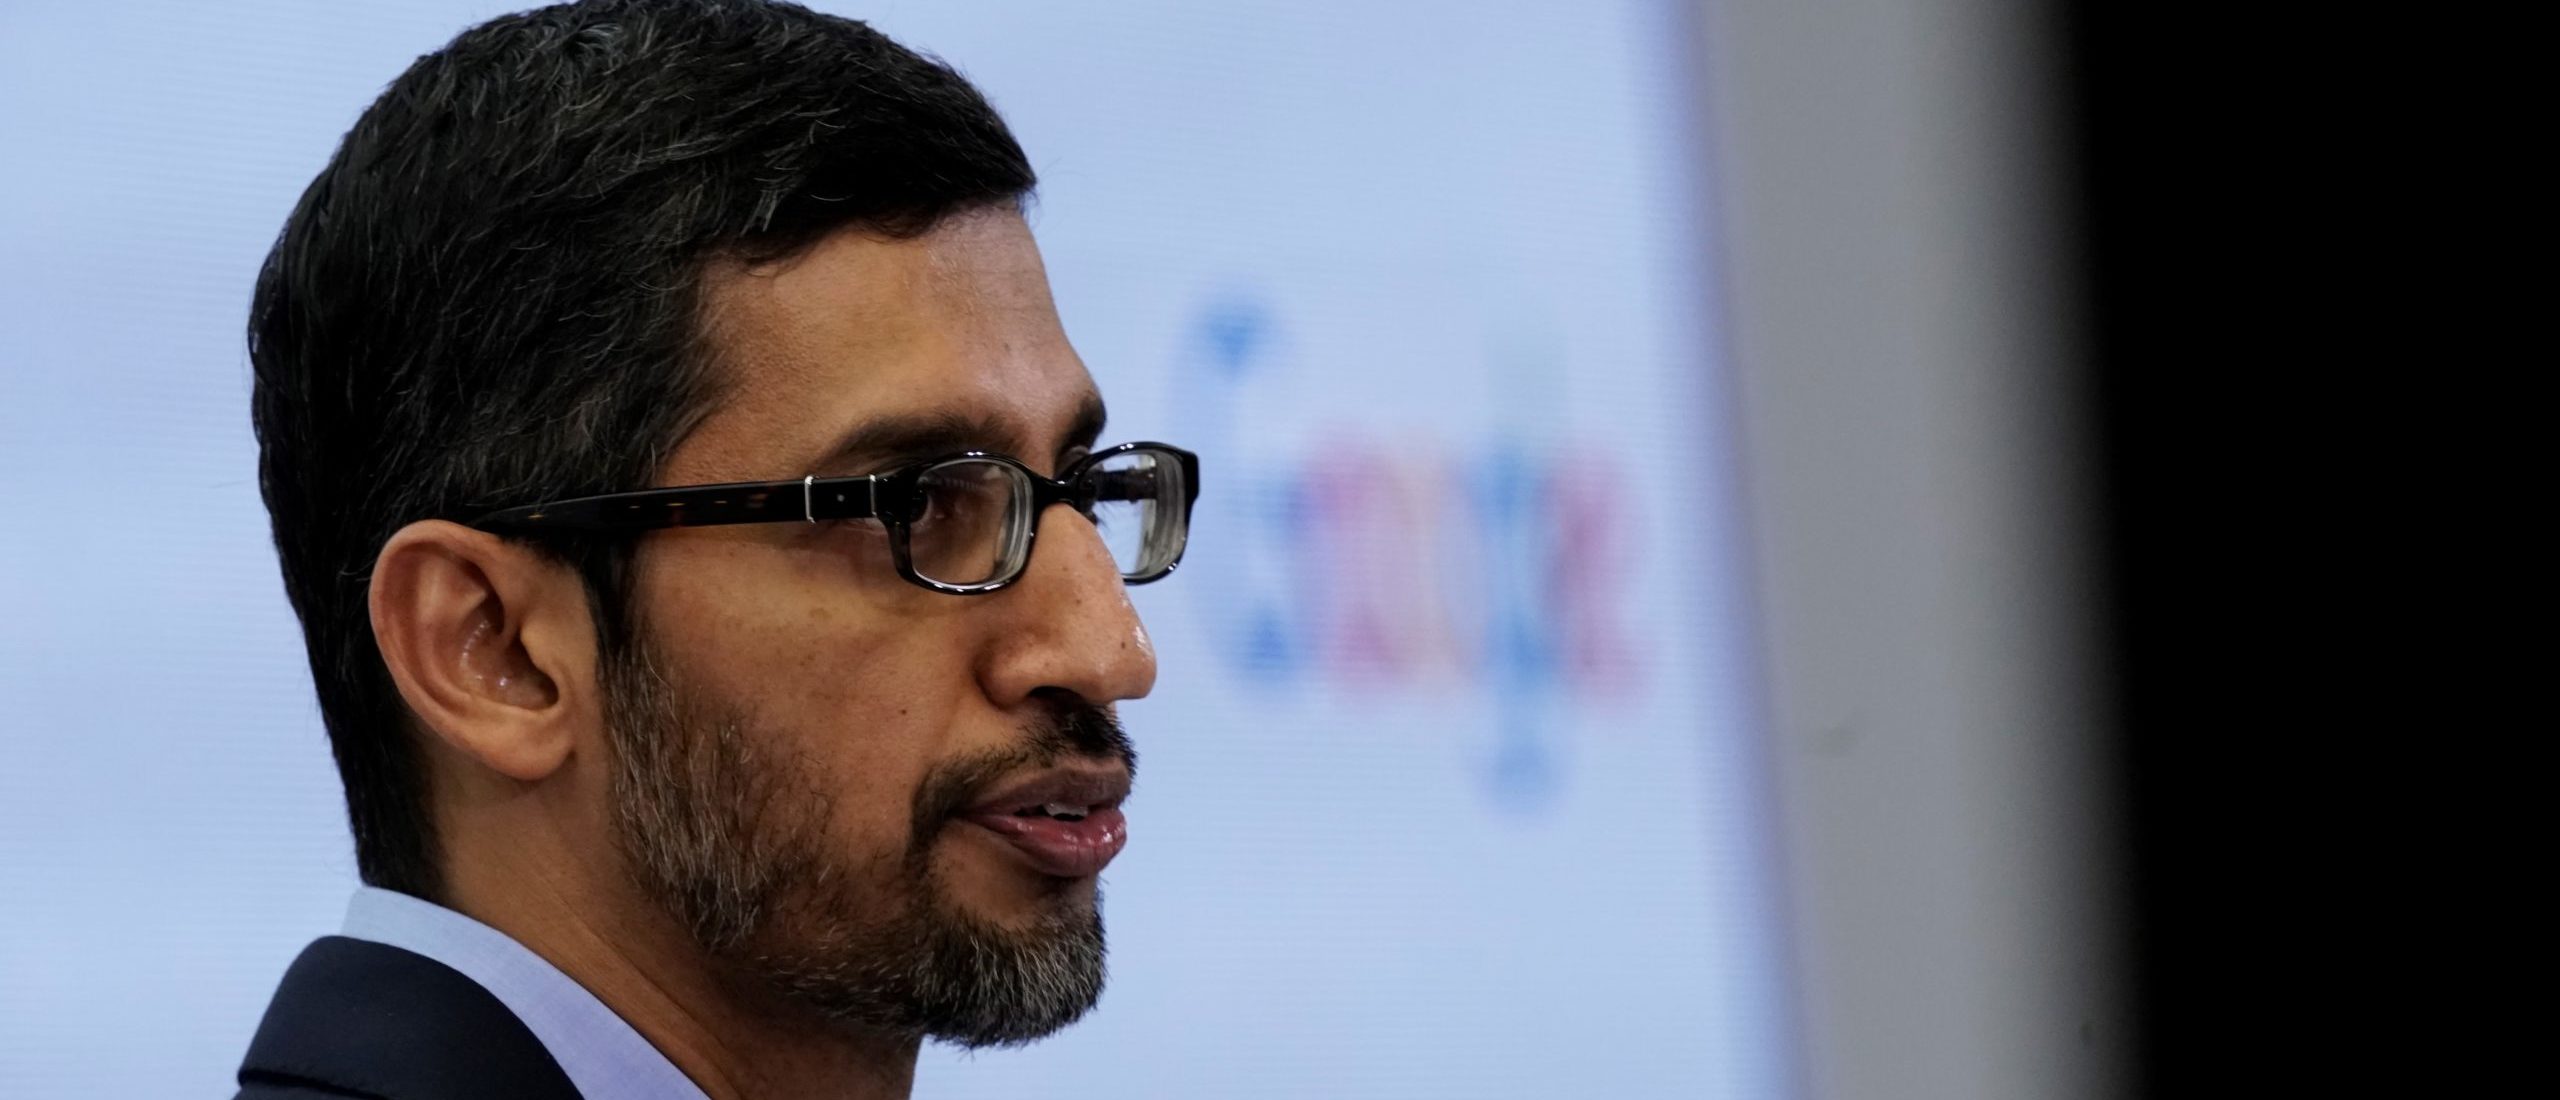 State AGs Sue Google, Say Company Lied To Customers To Harvest Their Data